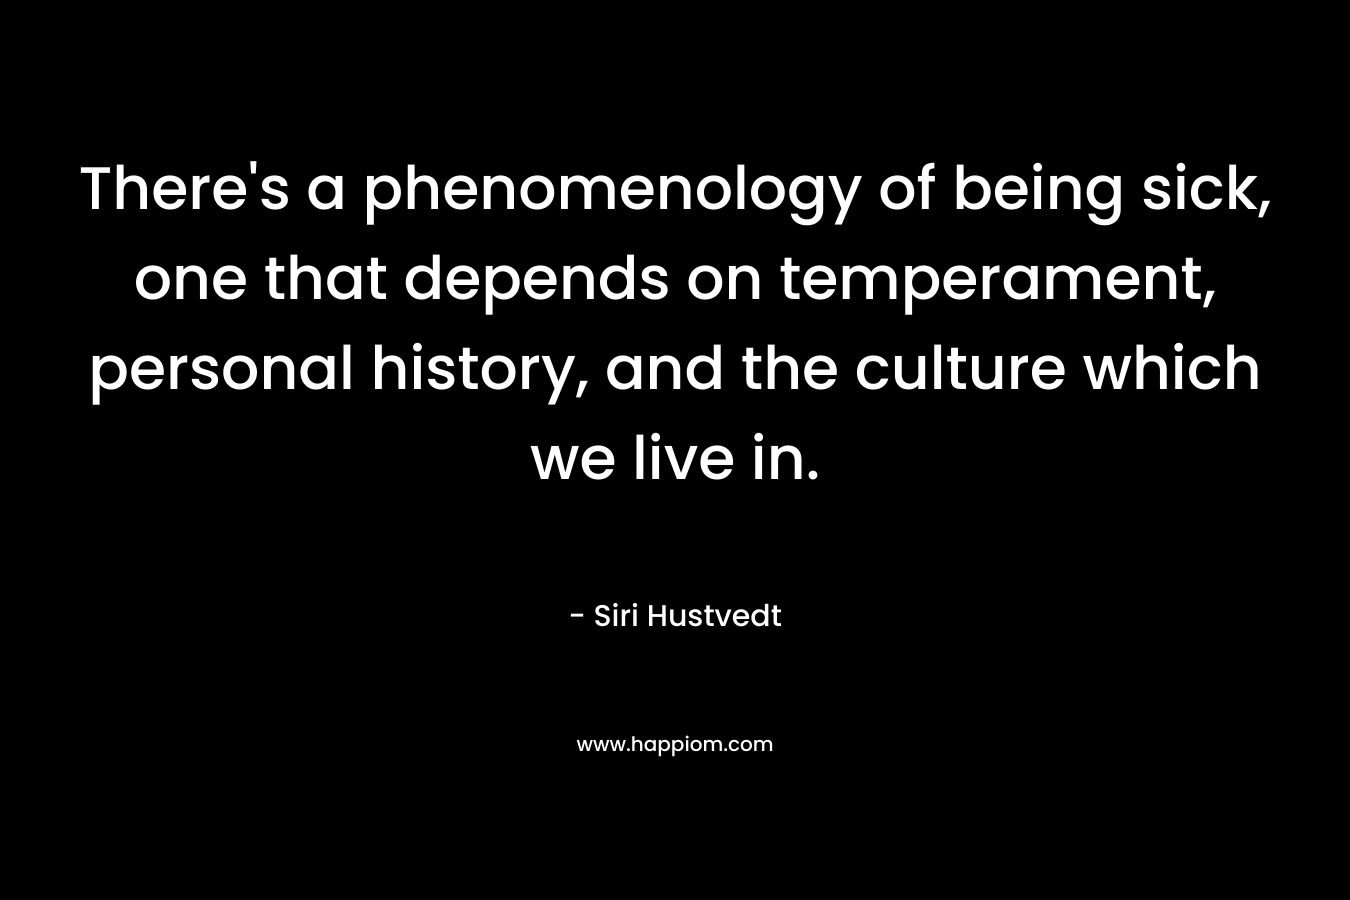 There’s a phenomenology of being sick, one that depends on temperament, personal history, and the culture which we live in. – Siri Hustvedt